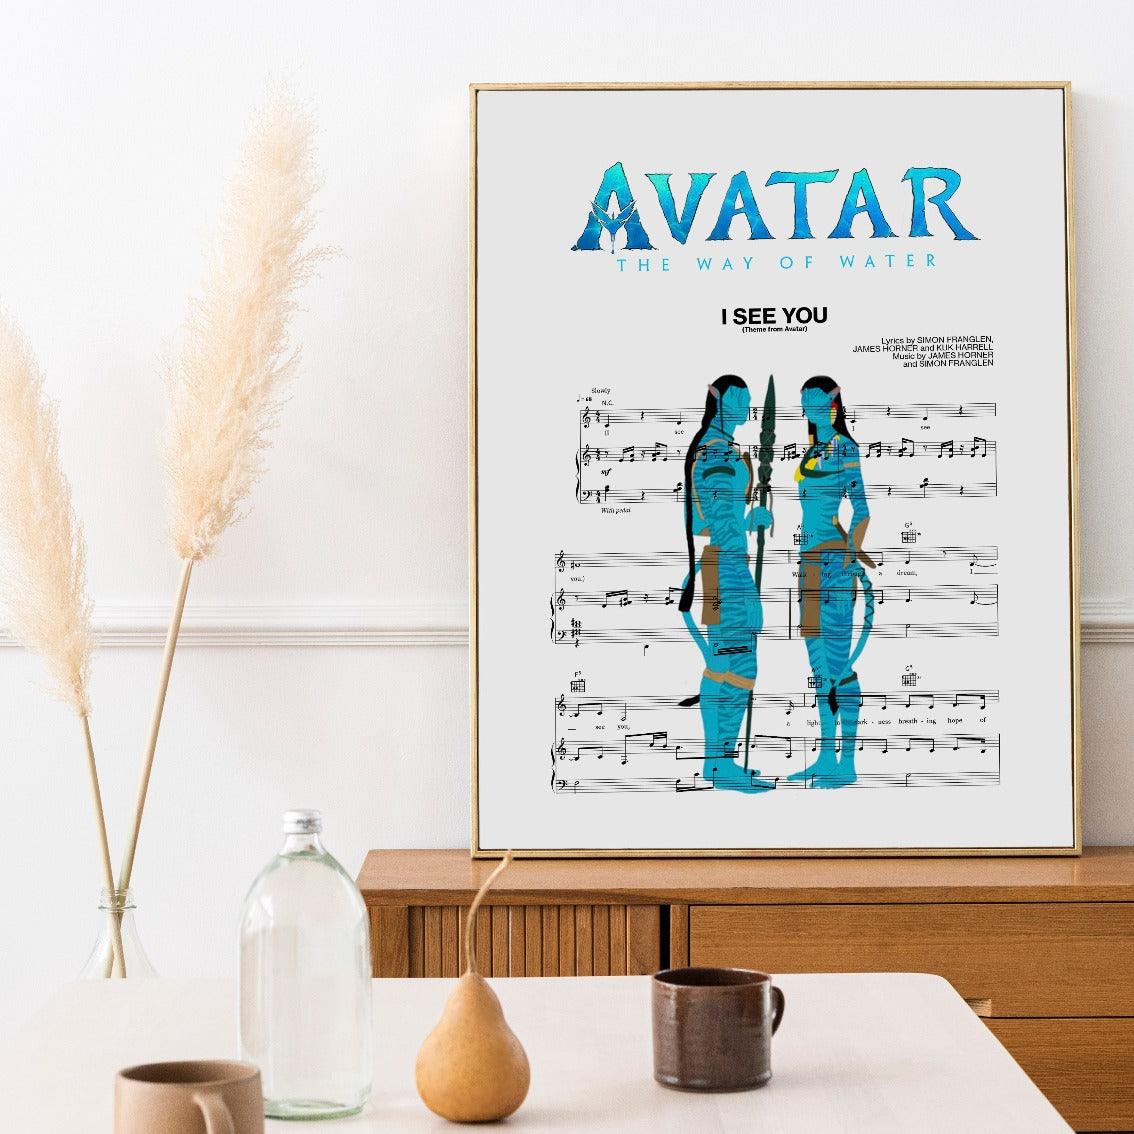 Give your walls some personality with this unique and eye-catching print. This print is based on the song 'I SEE YOU' by the incredible Avatar. The lyrics are beautifully depicted in a minimalist style, making it the perfect addition to any music lover's home. It also makes the perfect gift for any occasion.